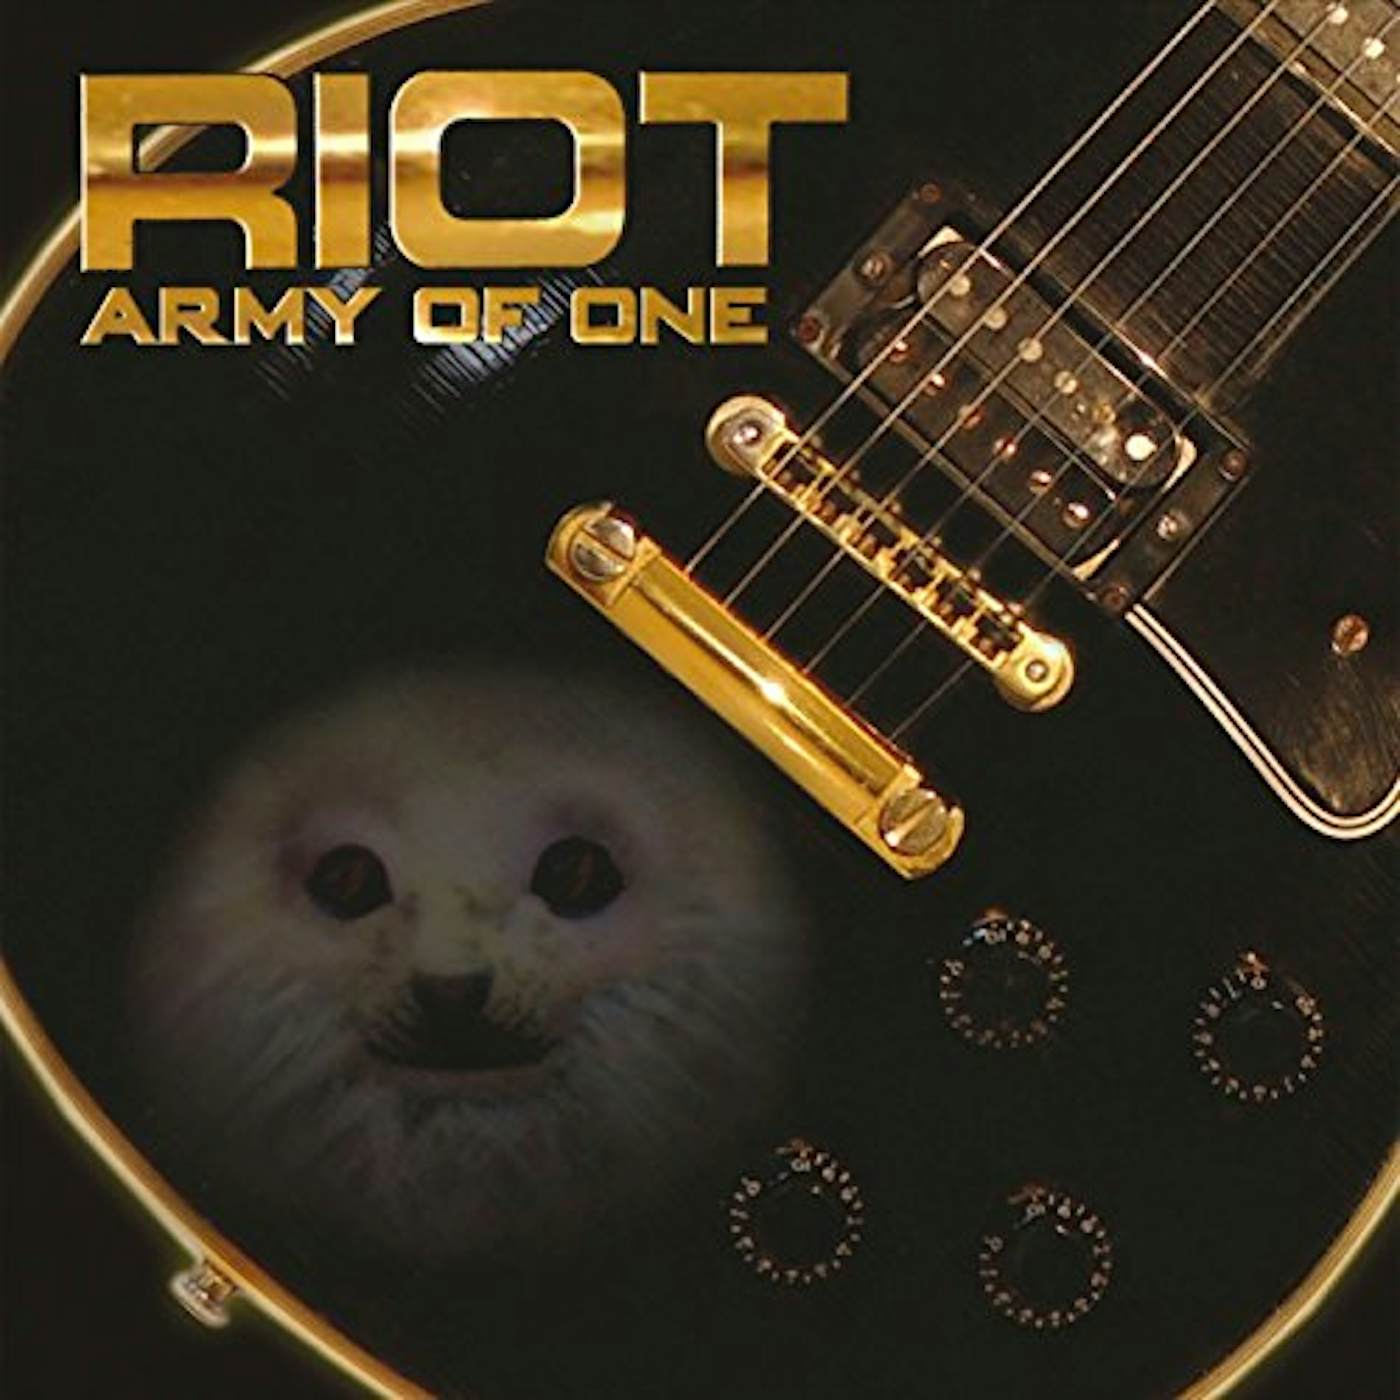 Riot ARMY OF ONE CD